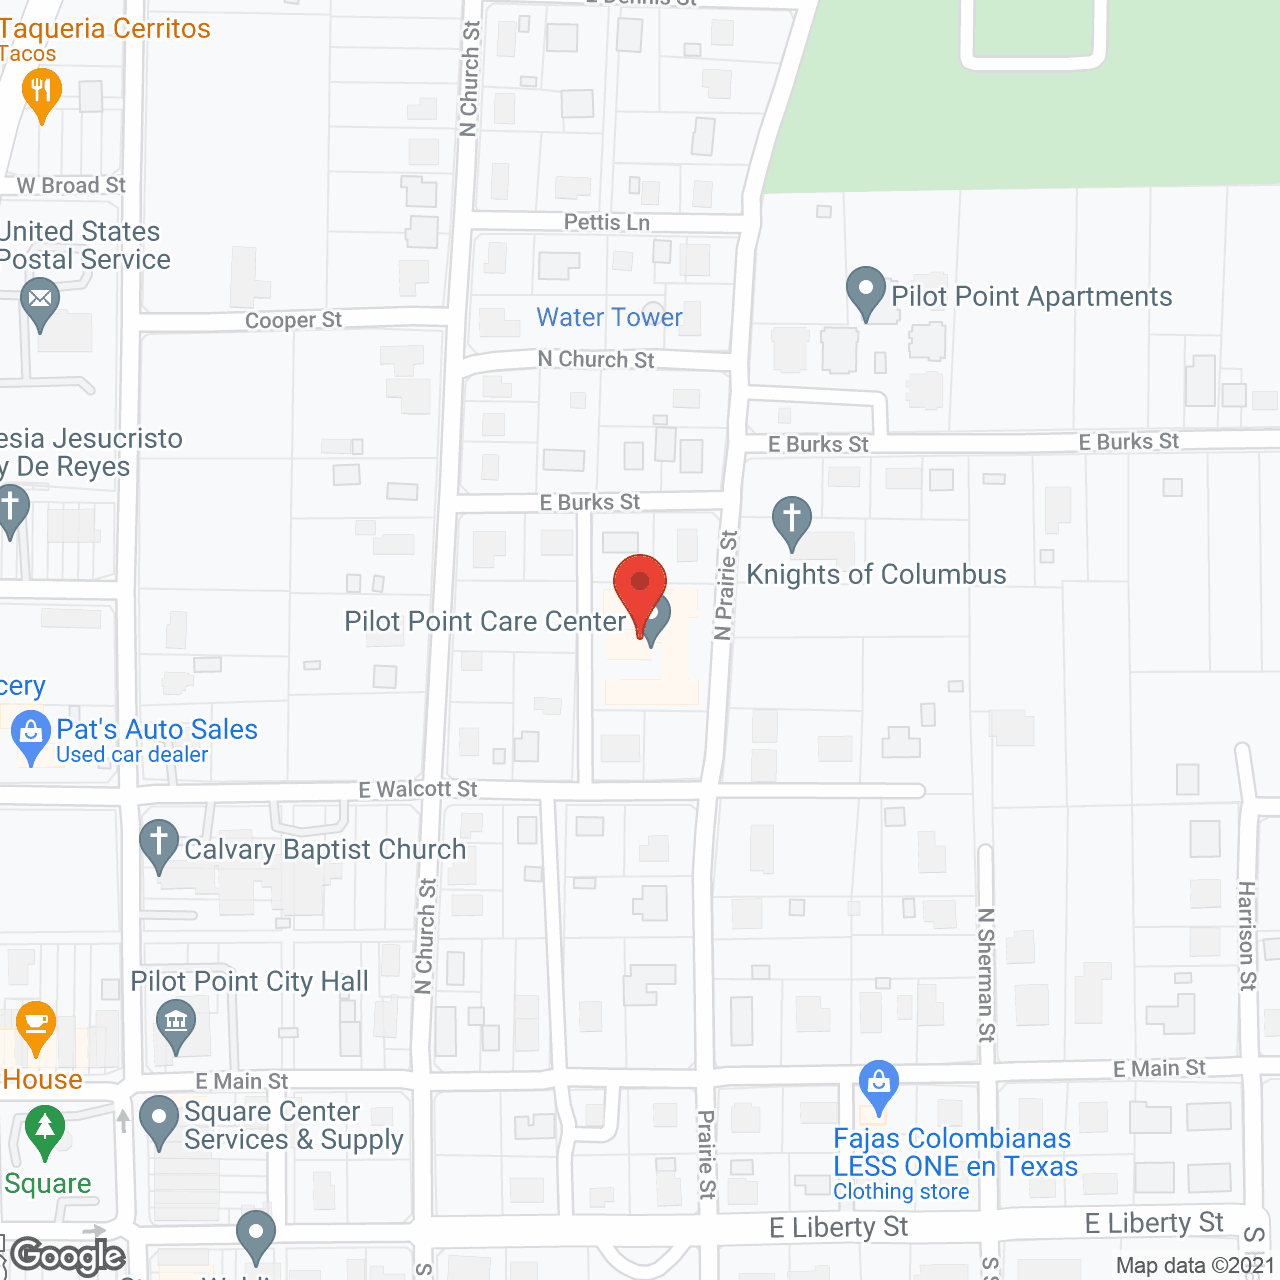 Pilot Point Care Center in google map